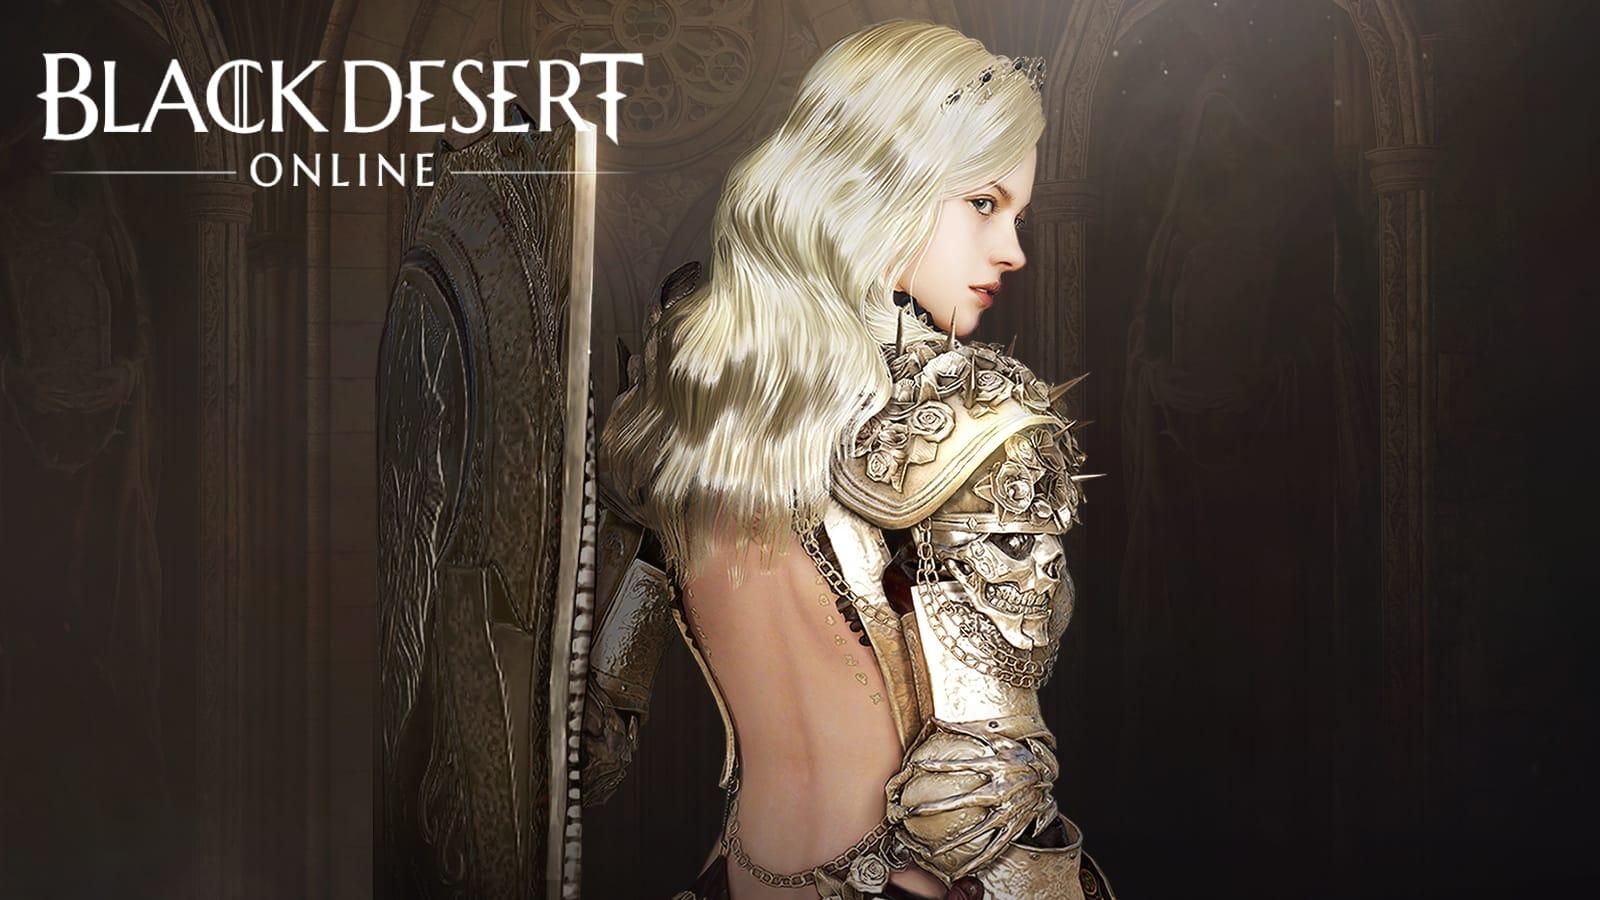 black desert online bdo warrior women with blond hair and shield looks over her shoulder at camera